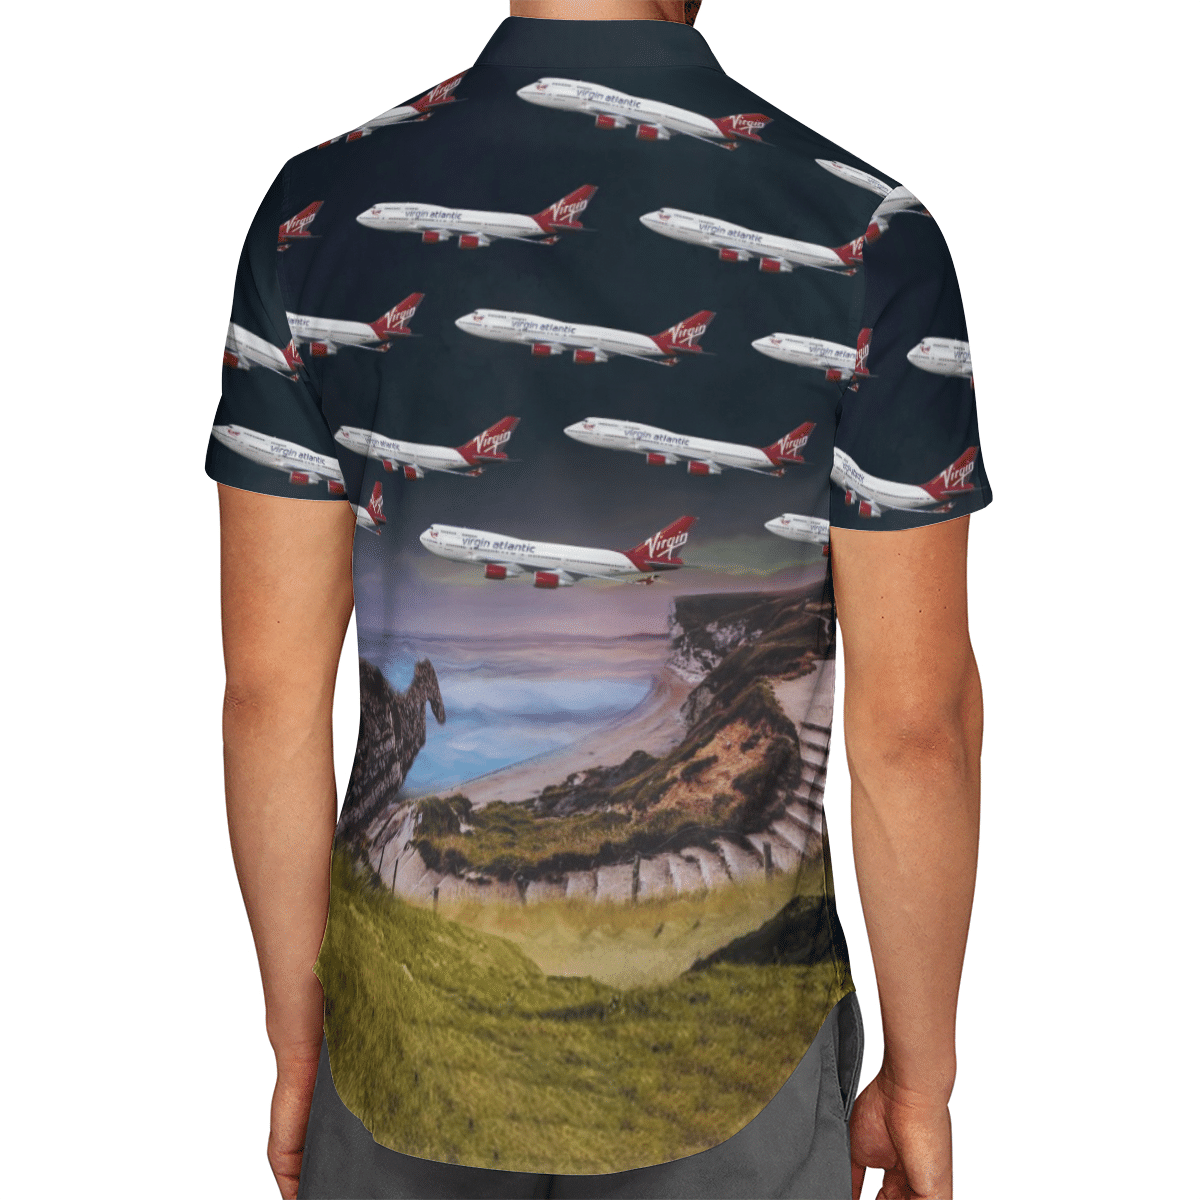 Going to the beach with a quality shirt 113